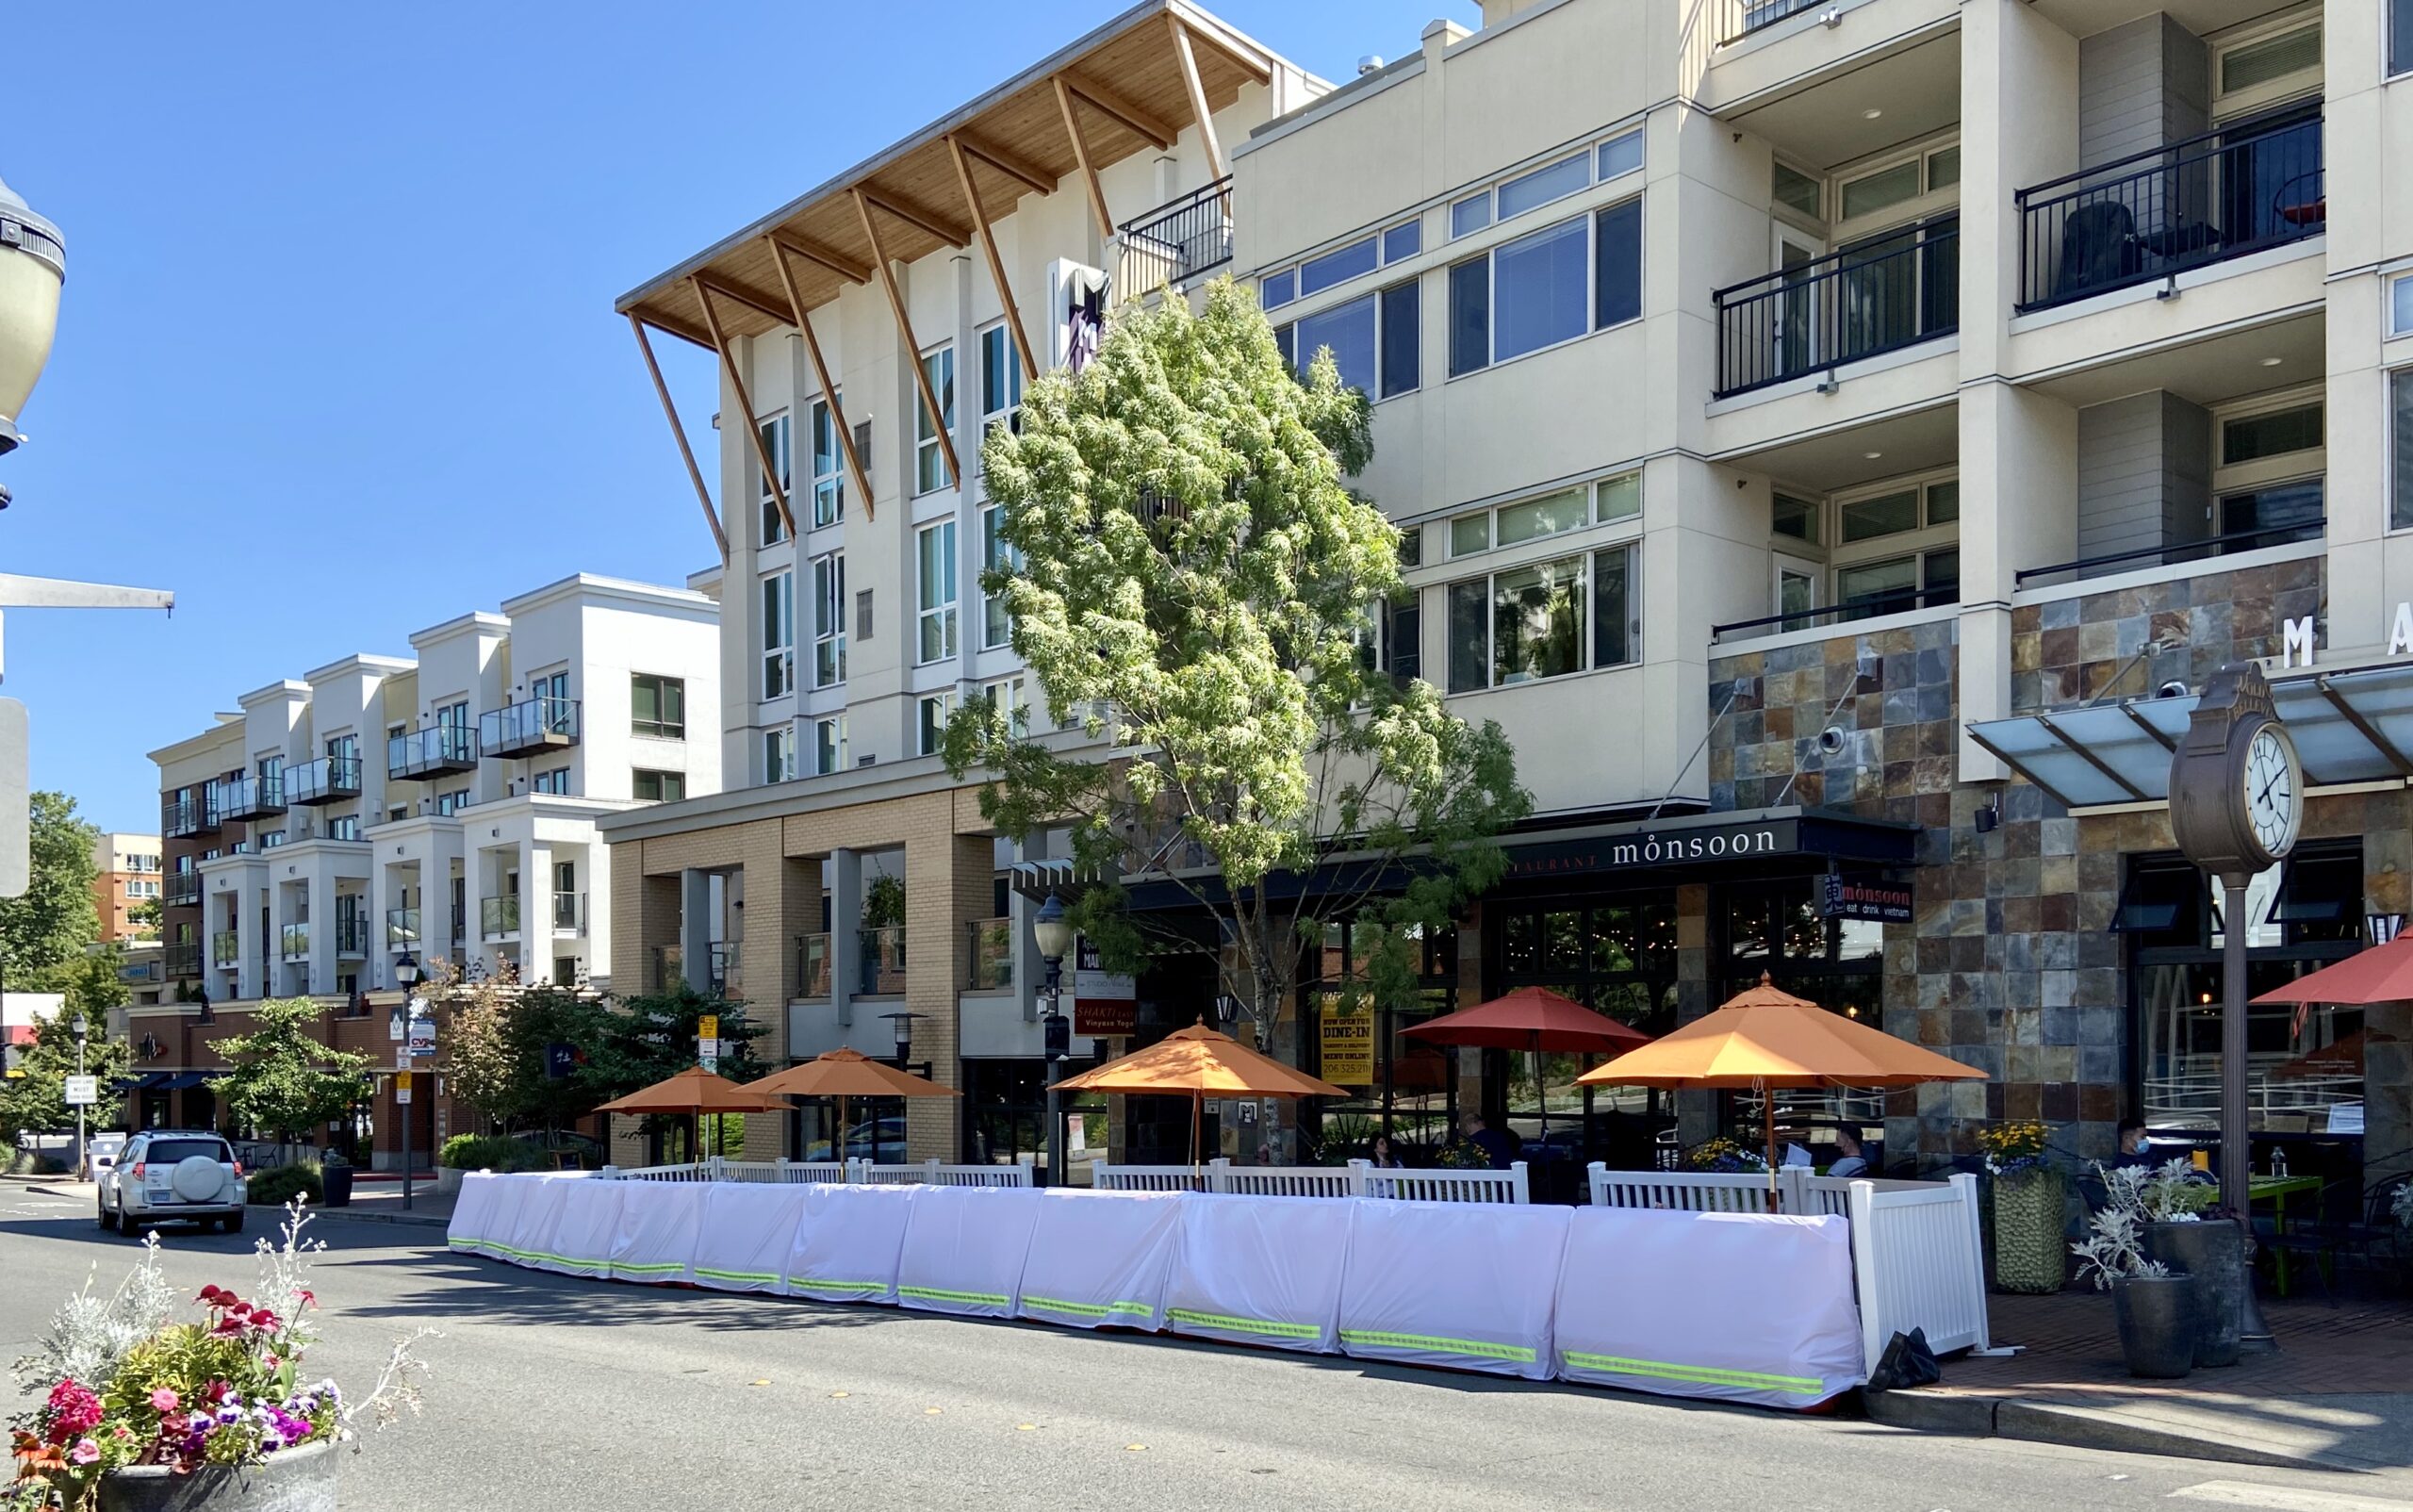 Main Street Restaurants Expand Outdoor Seating Areas